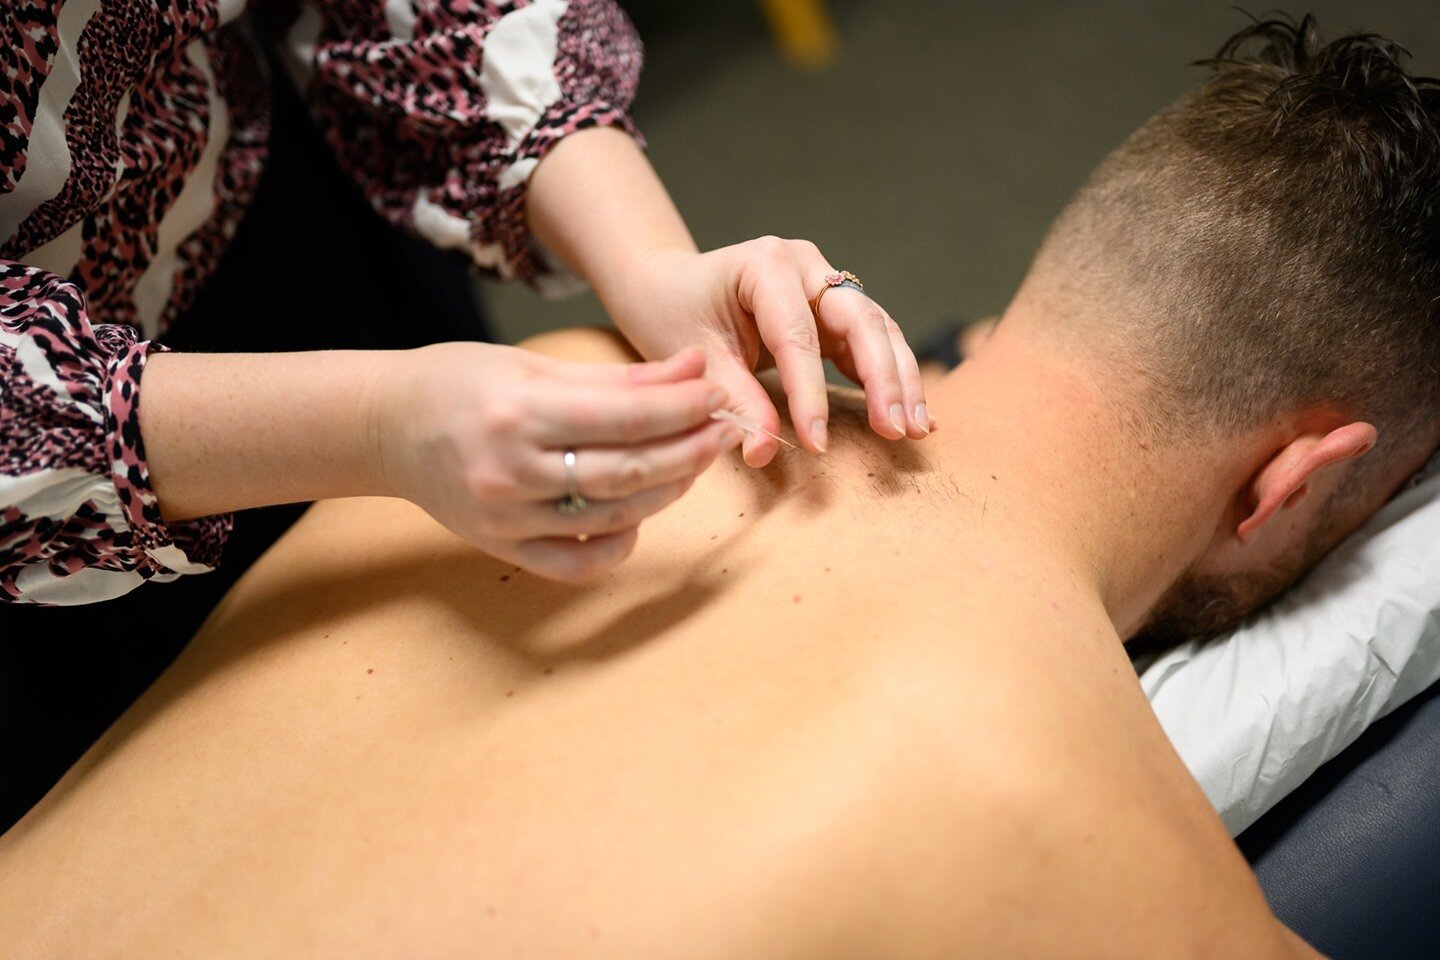 Acupuncture has been growing in popularity with the general community. It is a safe, regulated practice that can work well as an adjunct to a range of medical treatments. 🌱

We may be able to assist with:

◾ painful, post-surgical musculoskeletal co